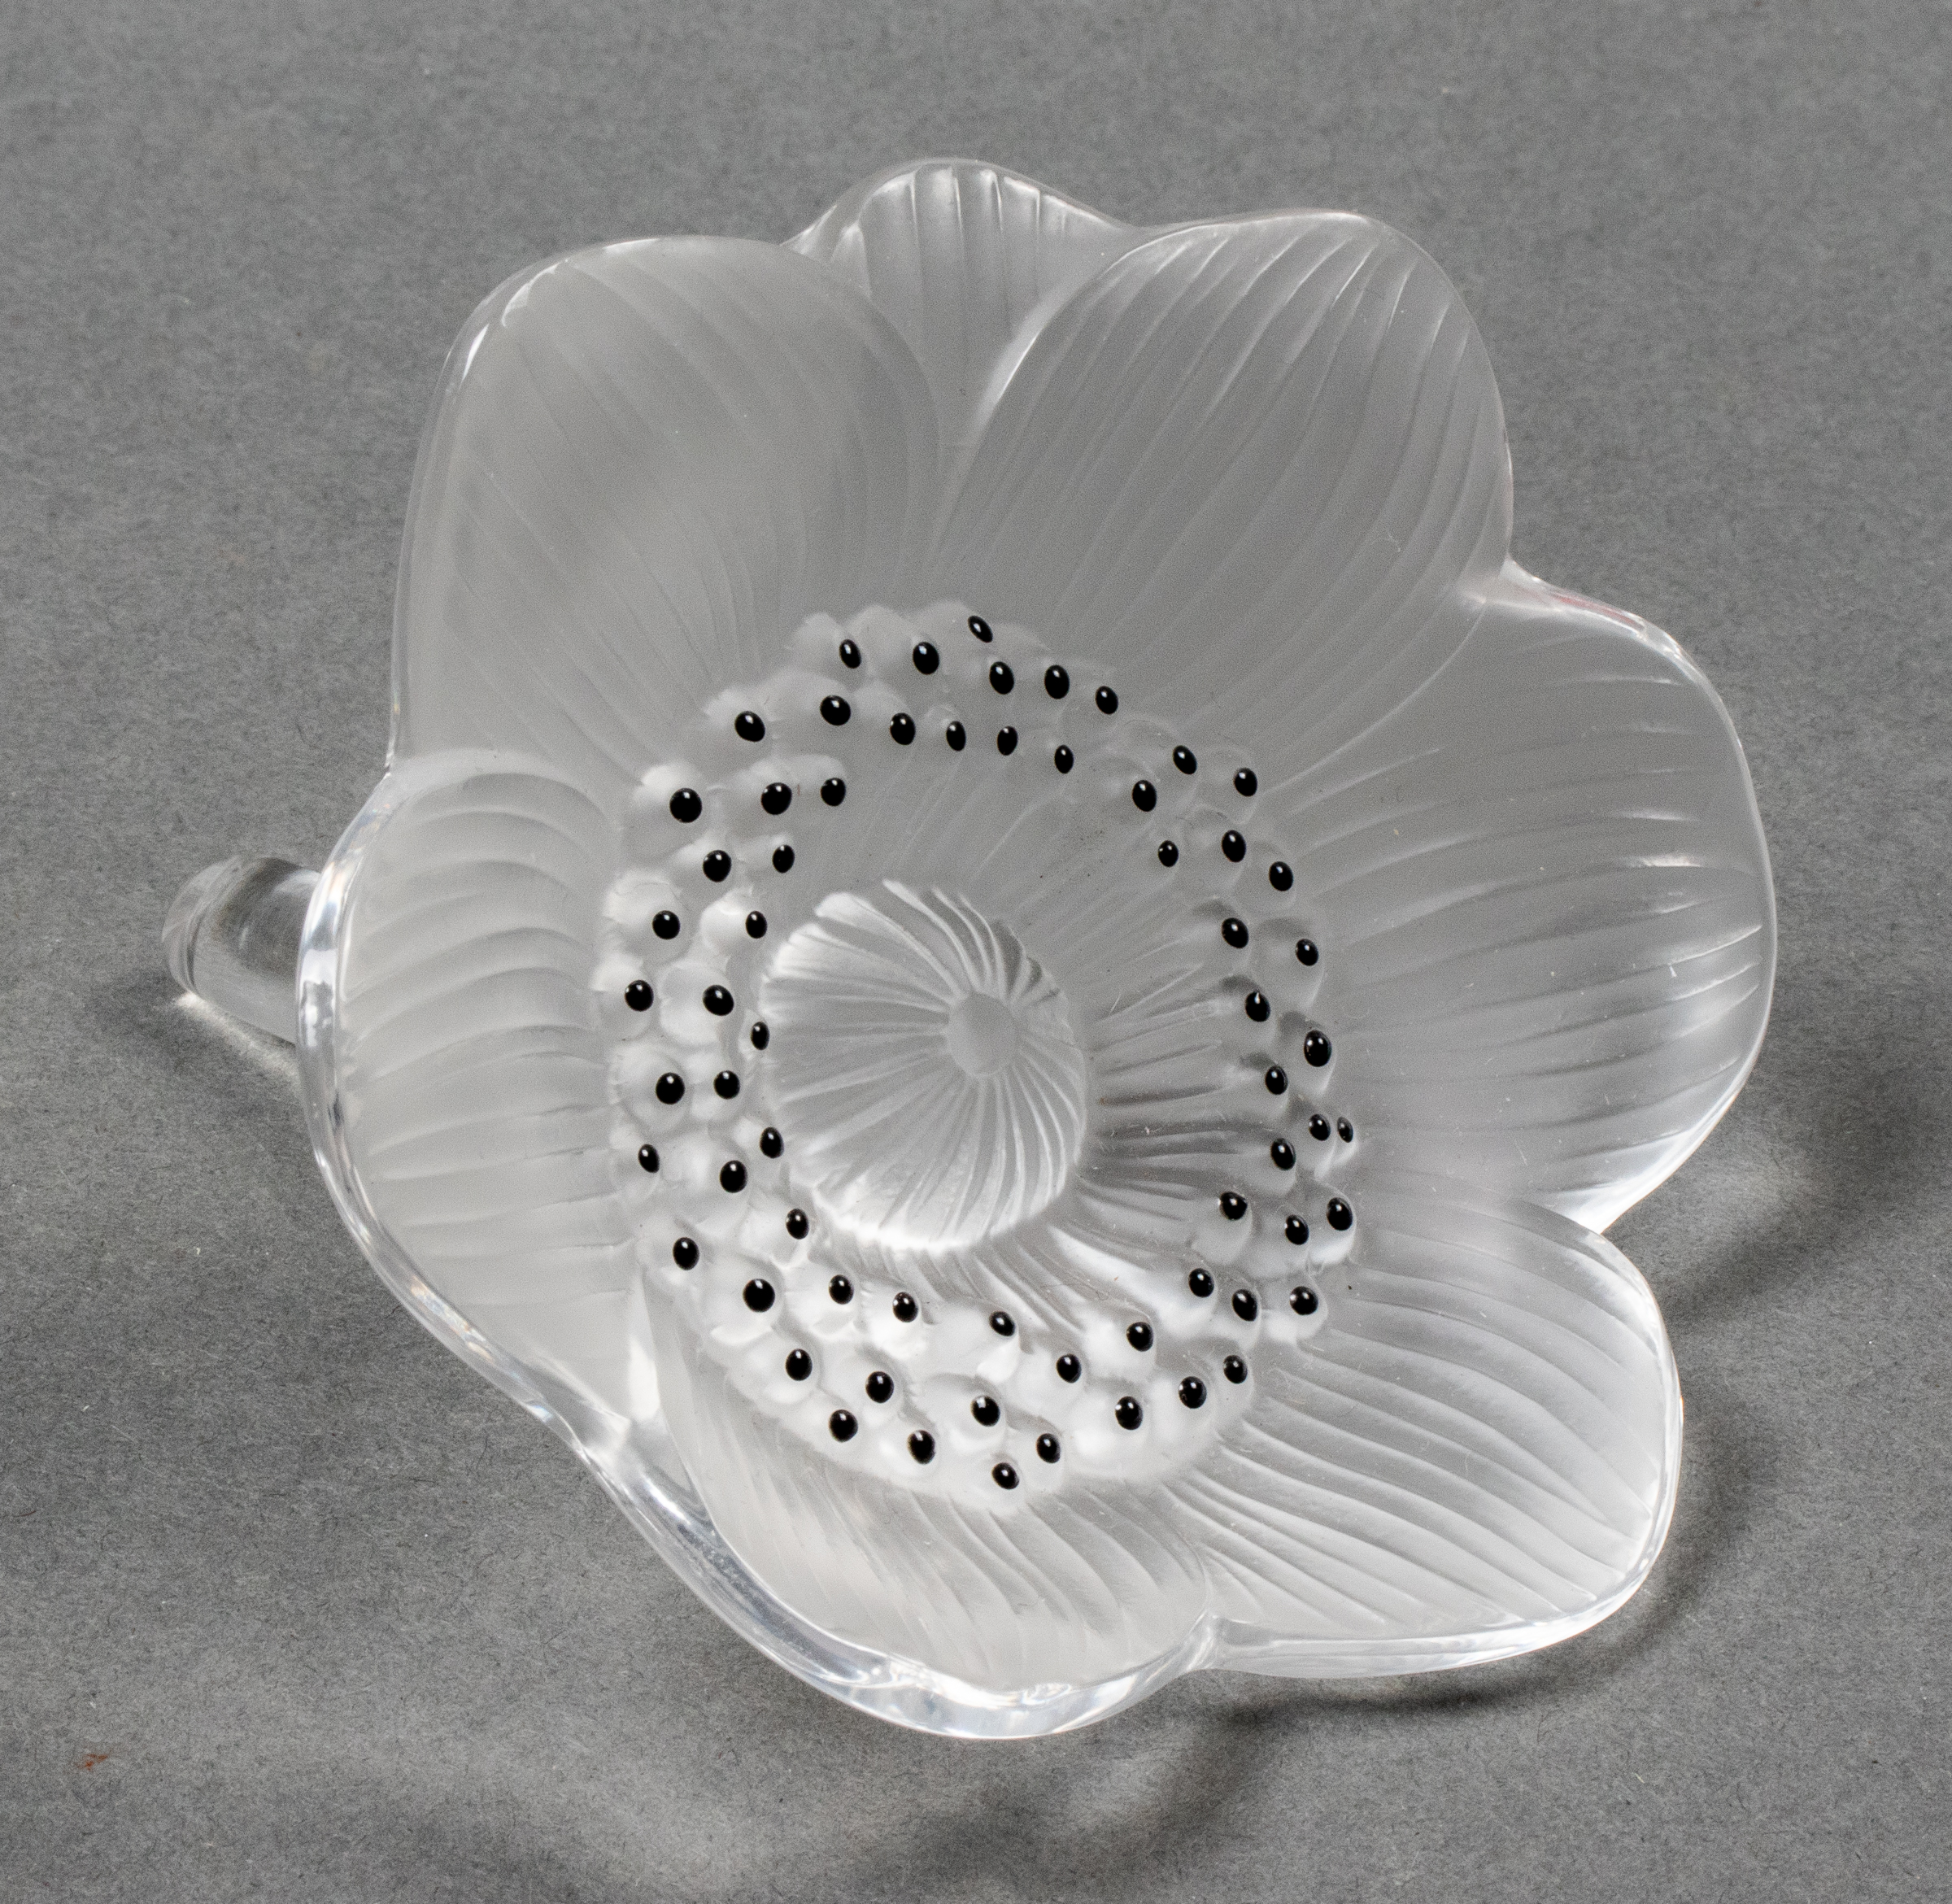 LALIQUE "ANEMONE" FROSTED ART GLASS